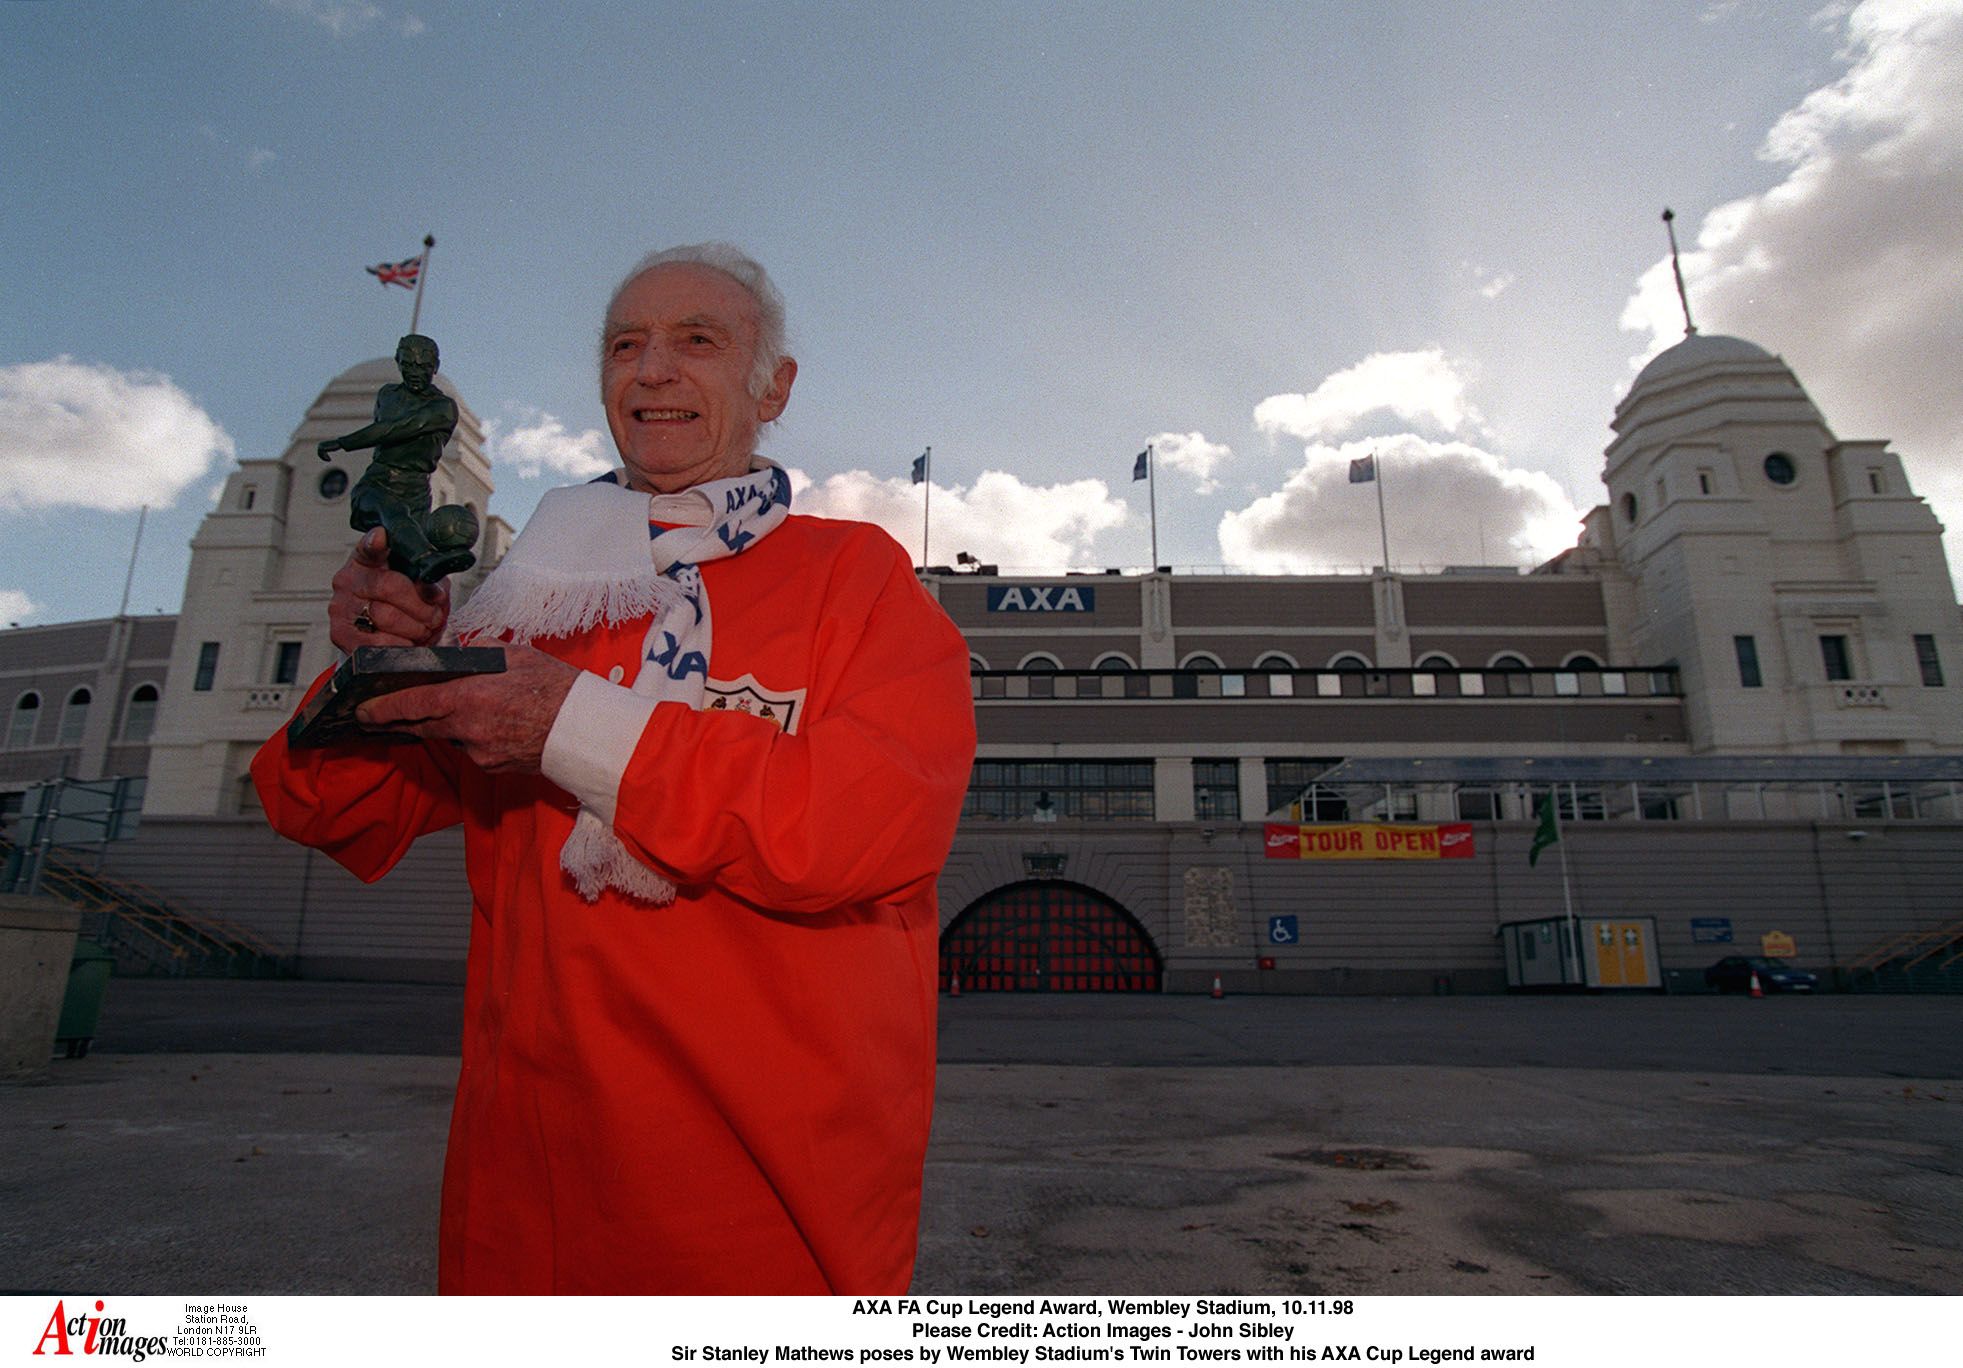 AXA FA Cup Legend Award, Wembley Stadium, 10.11.98 
Please Credit: Action Images - John Sibley 
Sir Stanley Matthews poses by Wembley Stadium's Twin Towers with his AXA Cup Legend award